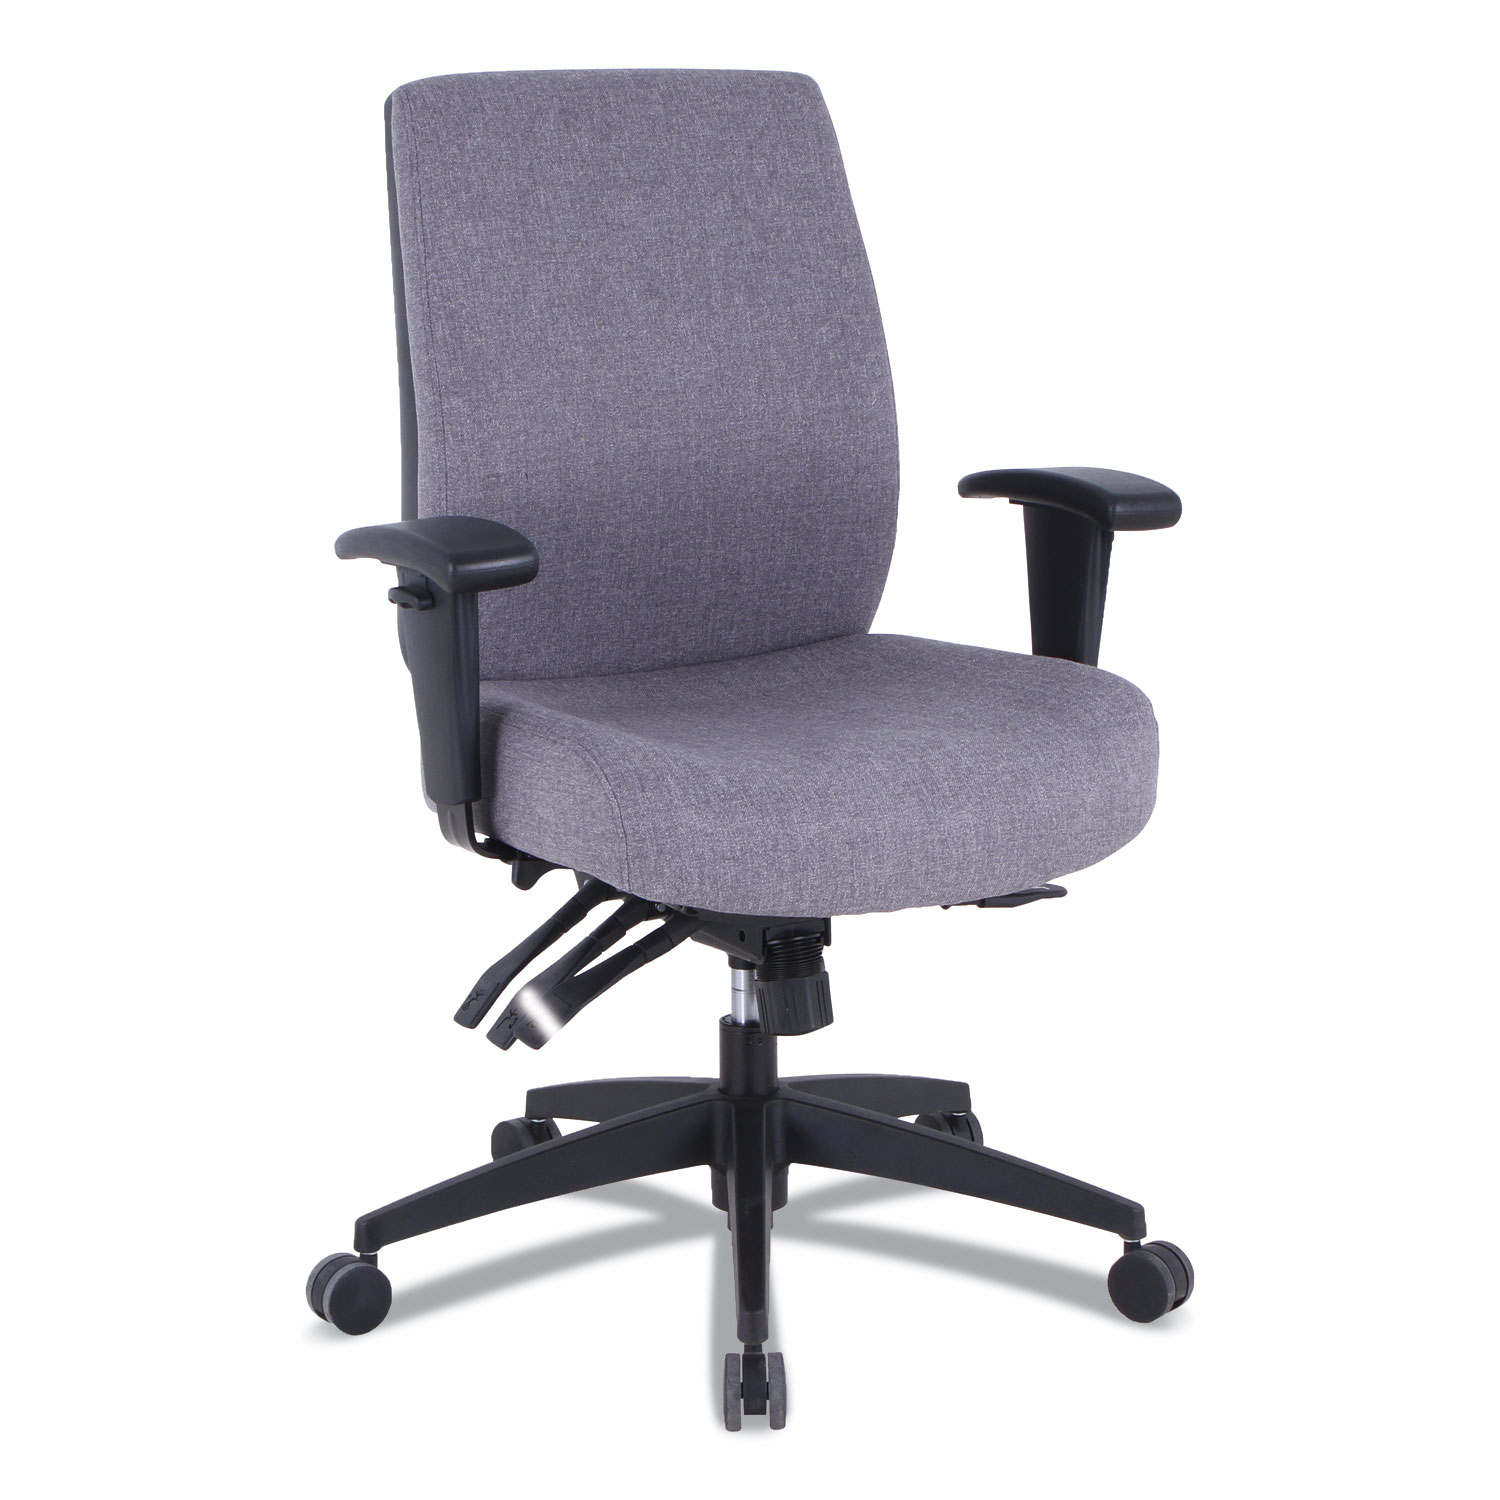 Alera Wrigley Series 24/7 High Performance High-Back Multifunction Task Chair, Up to 275 lbs., Gray Seat/Back, Black Base